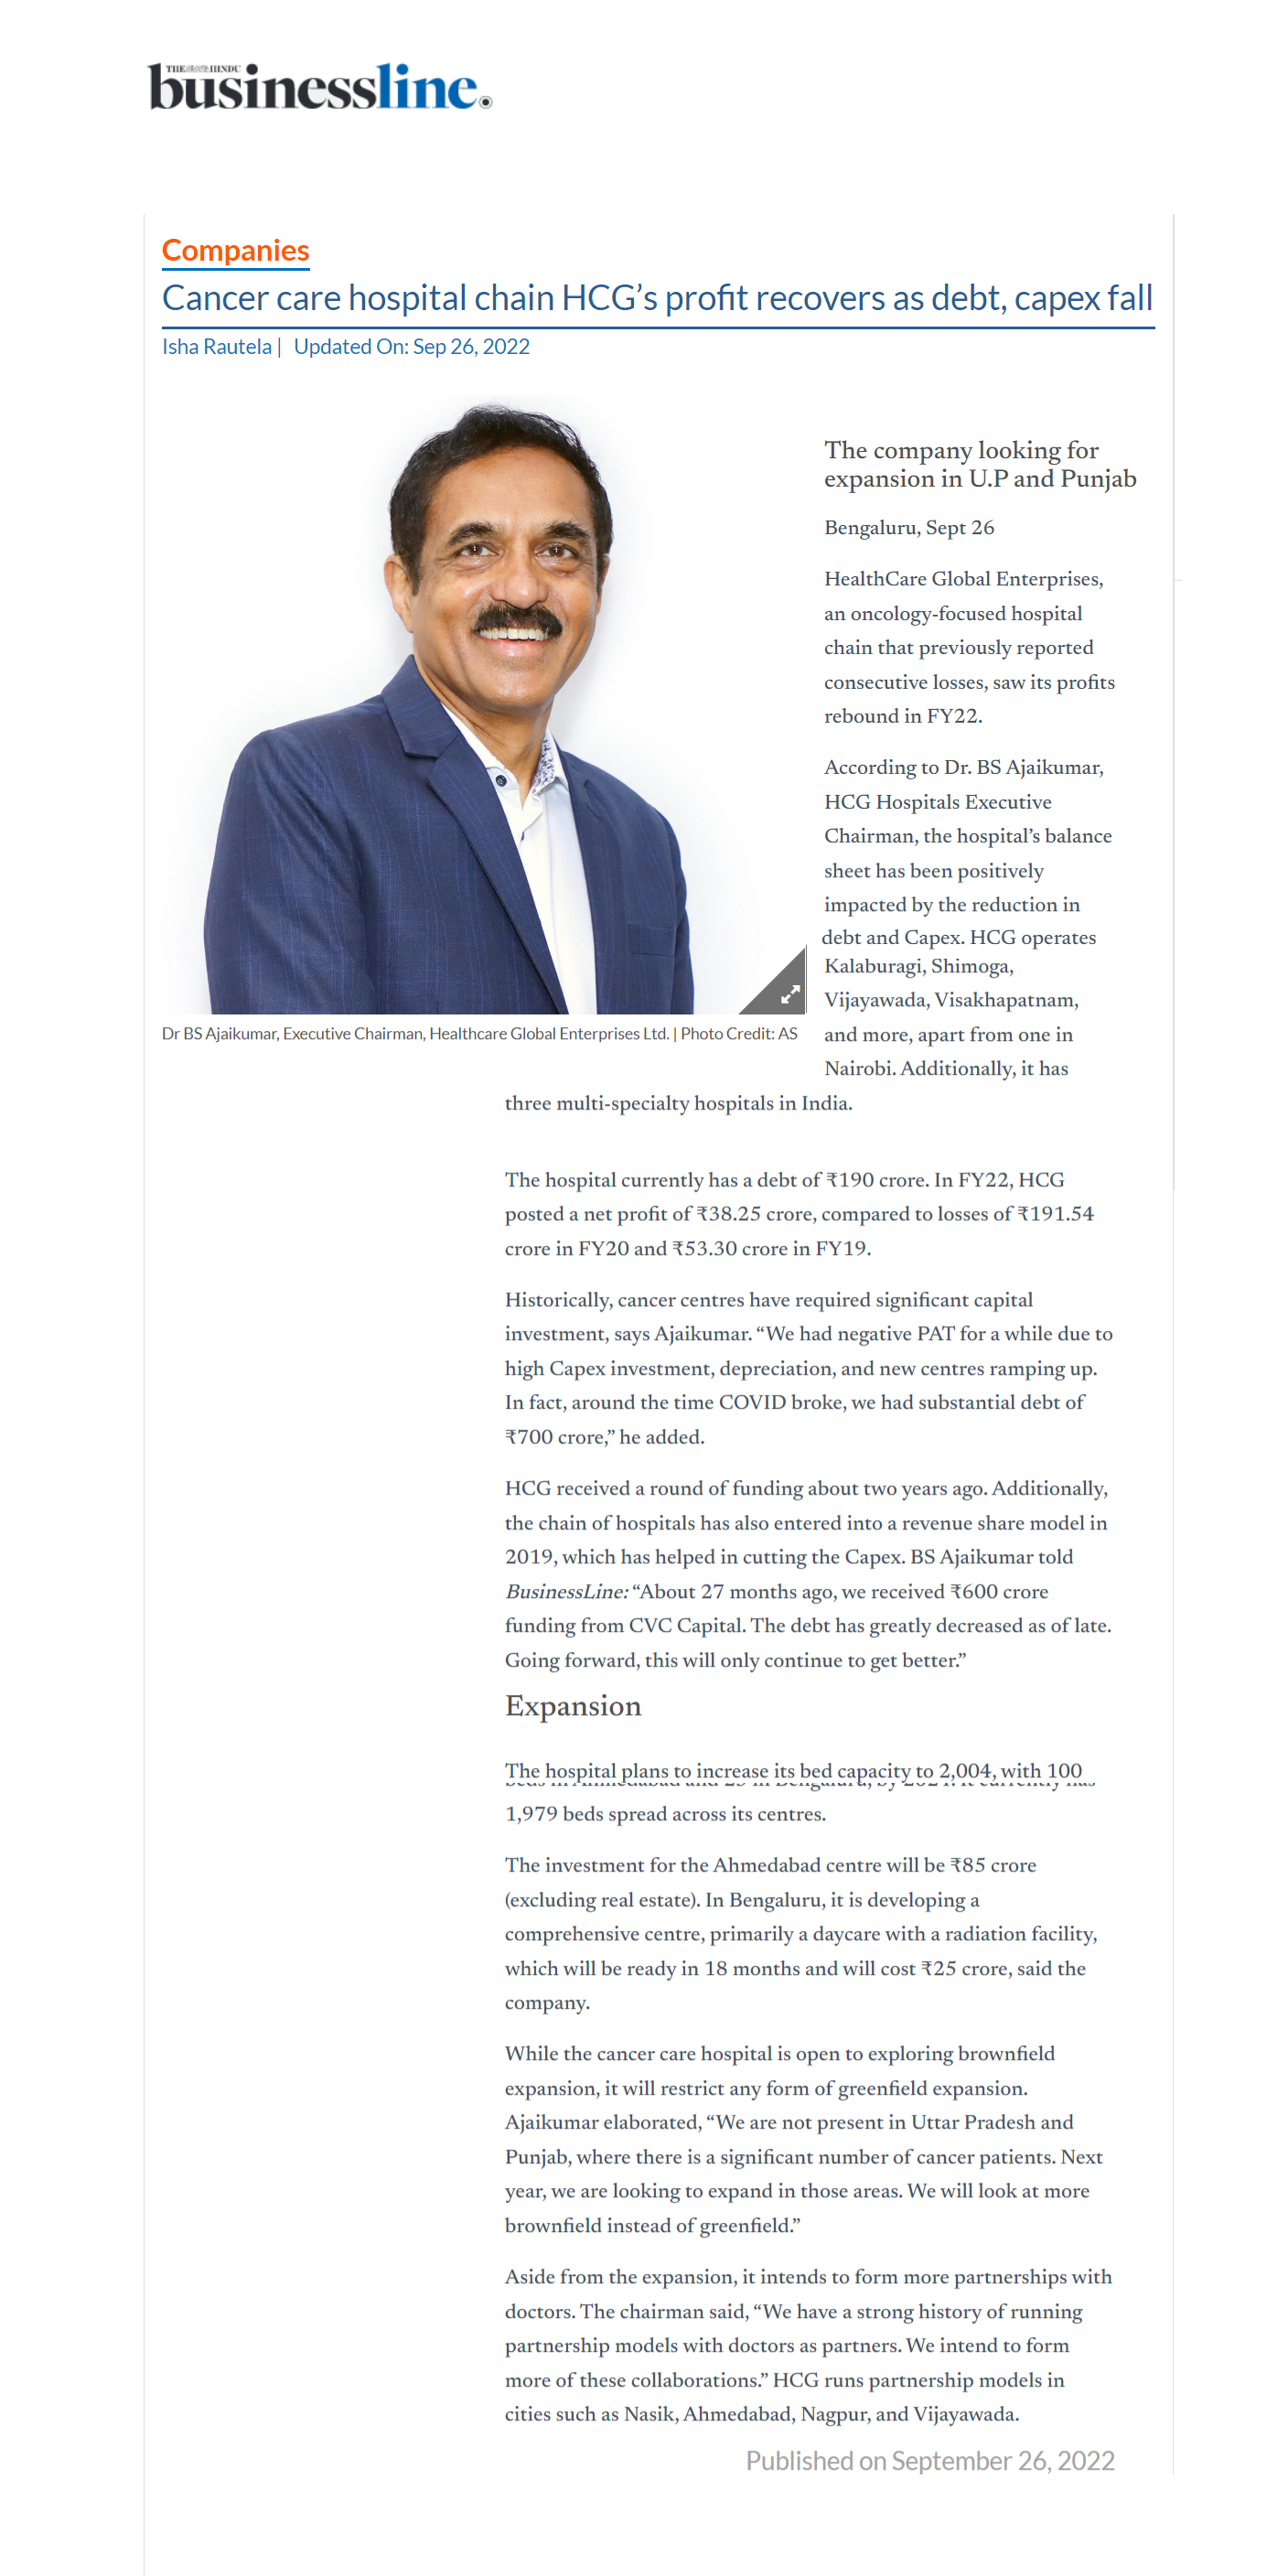 News Update: An exclusive interview Dr. BS Ajaikumar, our Executive Chairman was featured in The Hindu Business Line publication